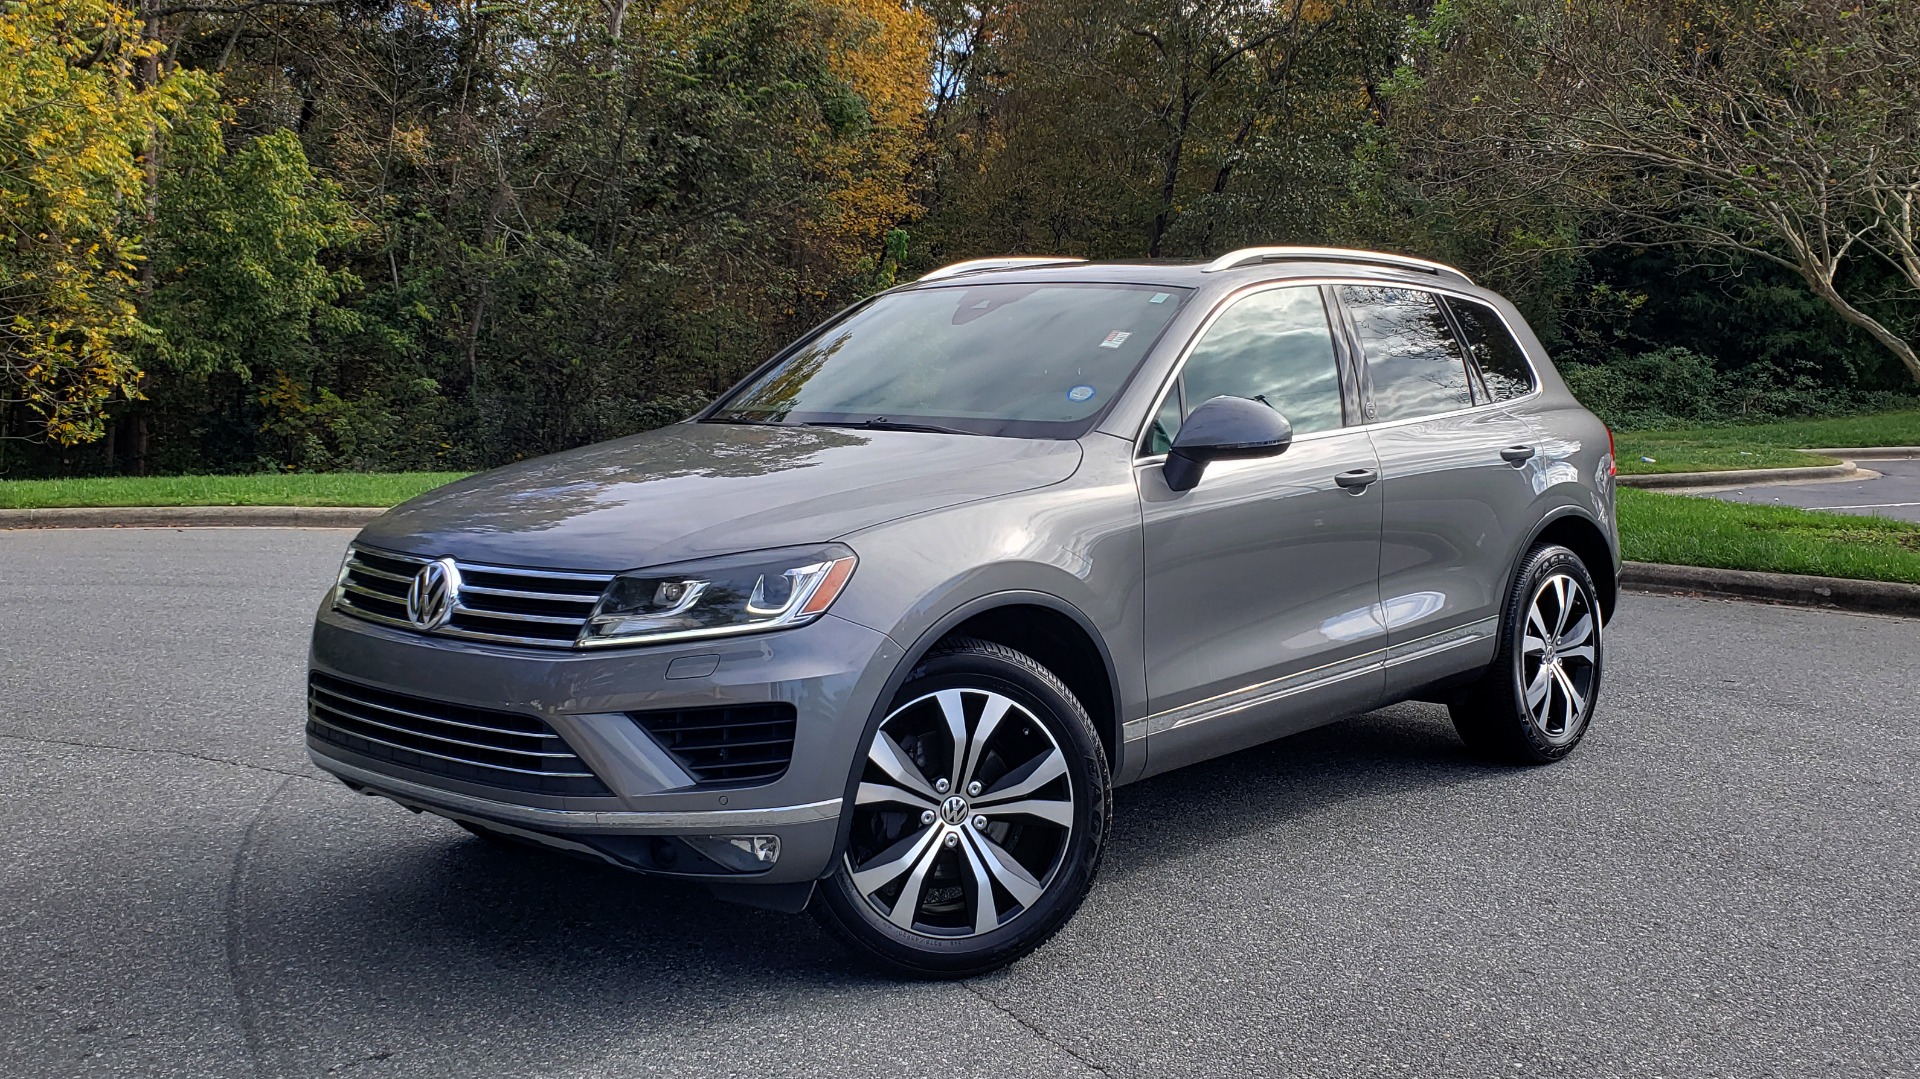 Used 2017 Volkswagen TOUAREG V6 WOLFSBURG EDITION / NAV / PANO-ROOF / ACC / REARVIEW for sale Sold at Formula Imports in Charlotte NC 28227 1